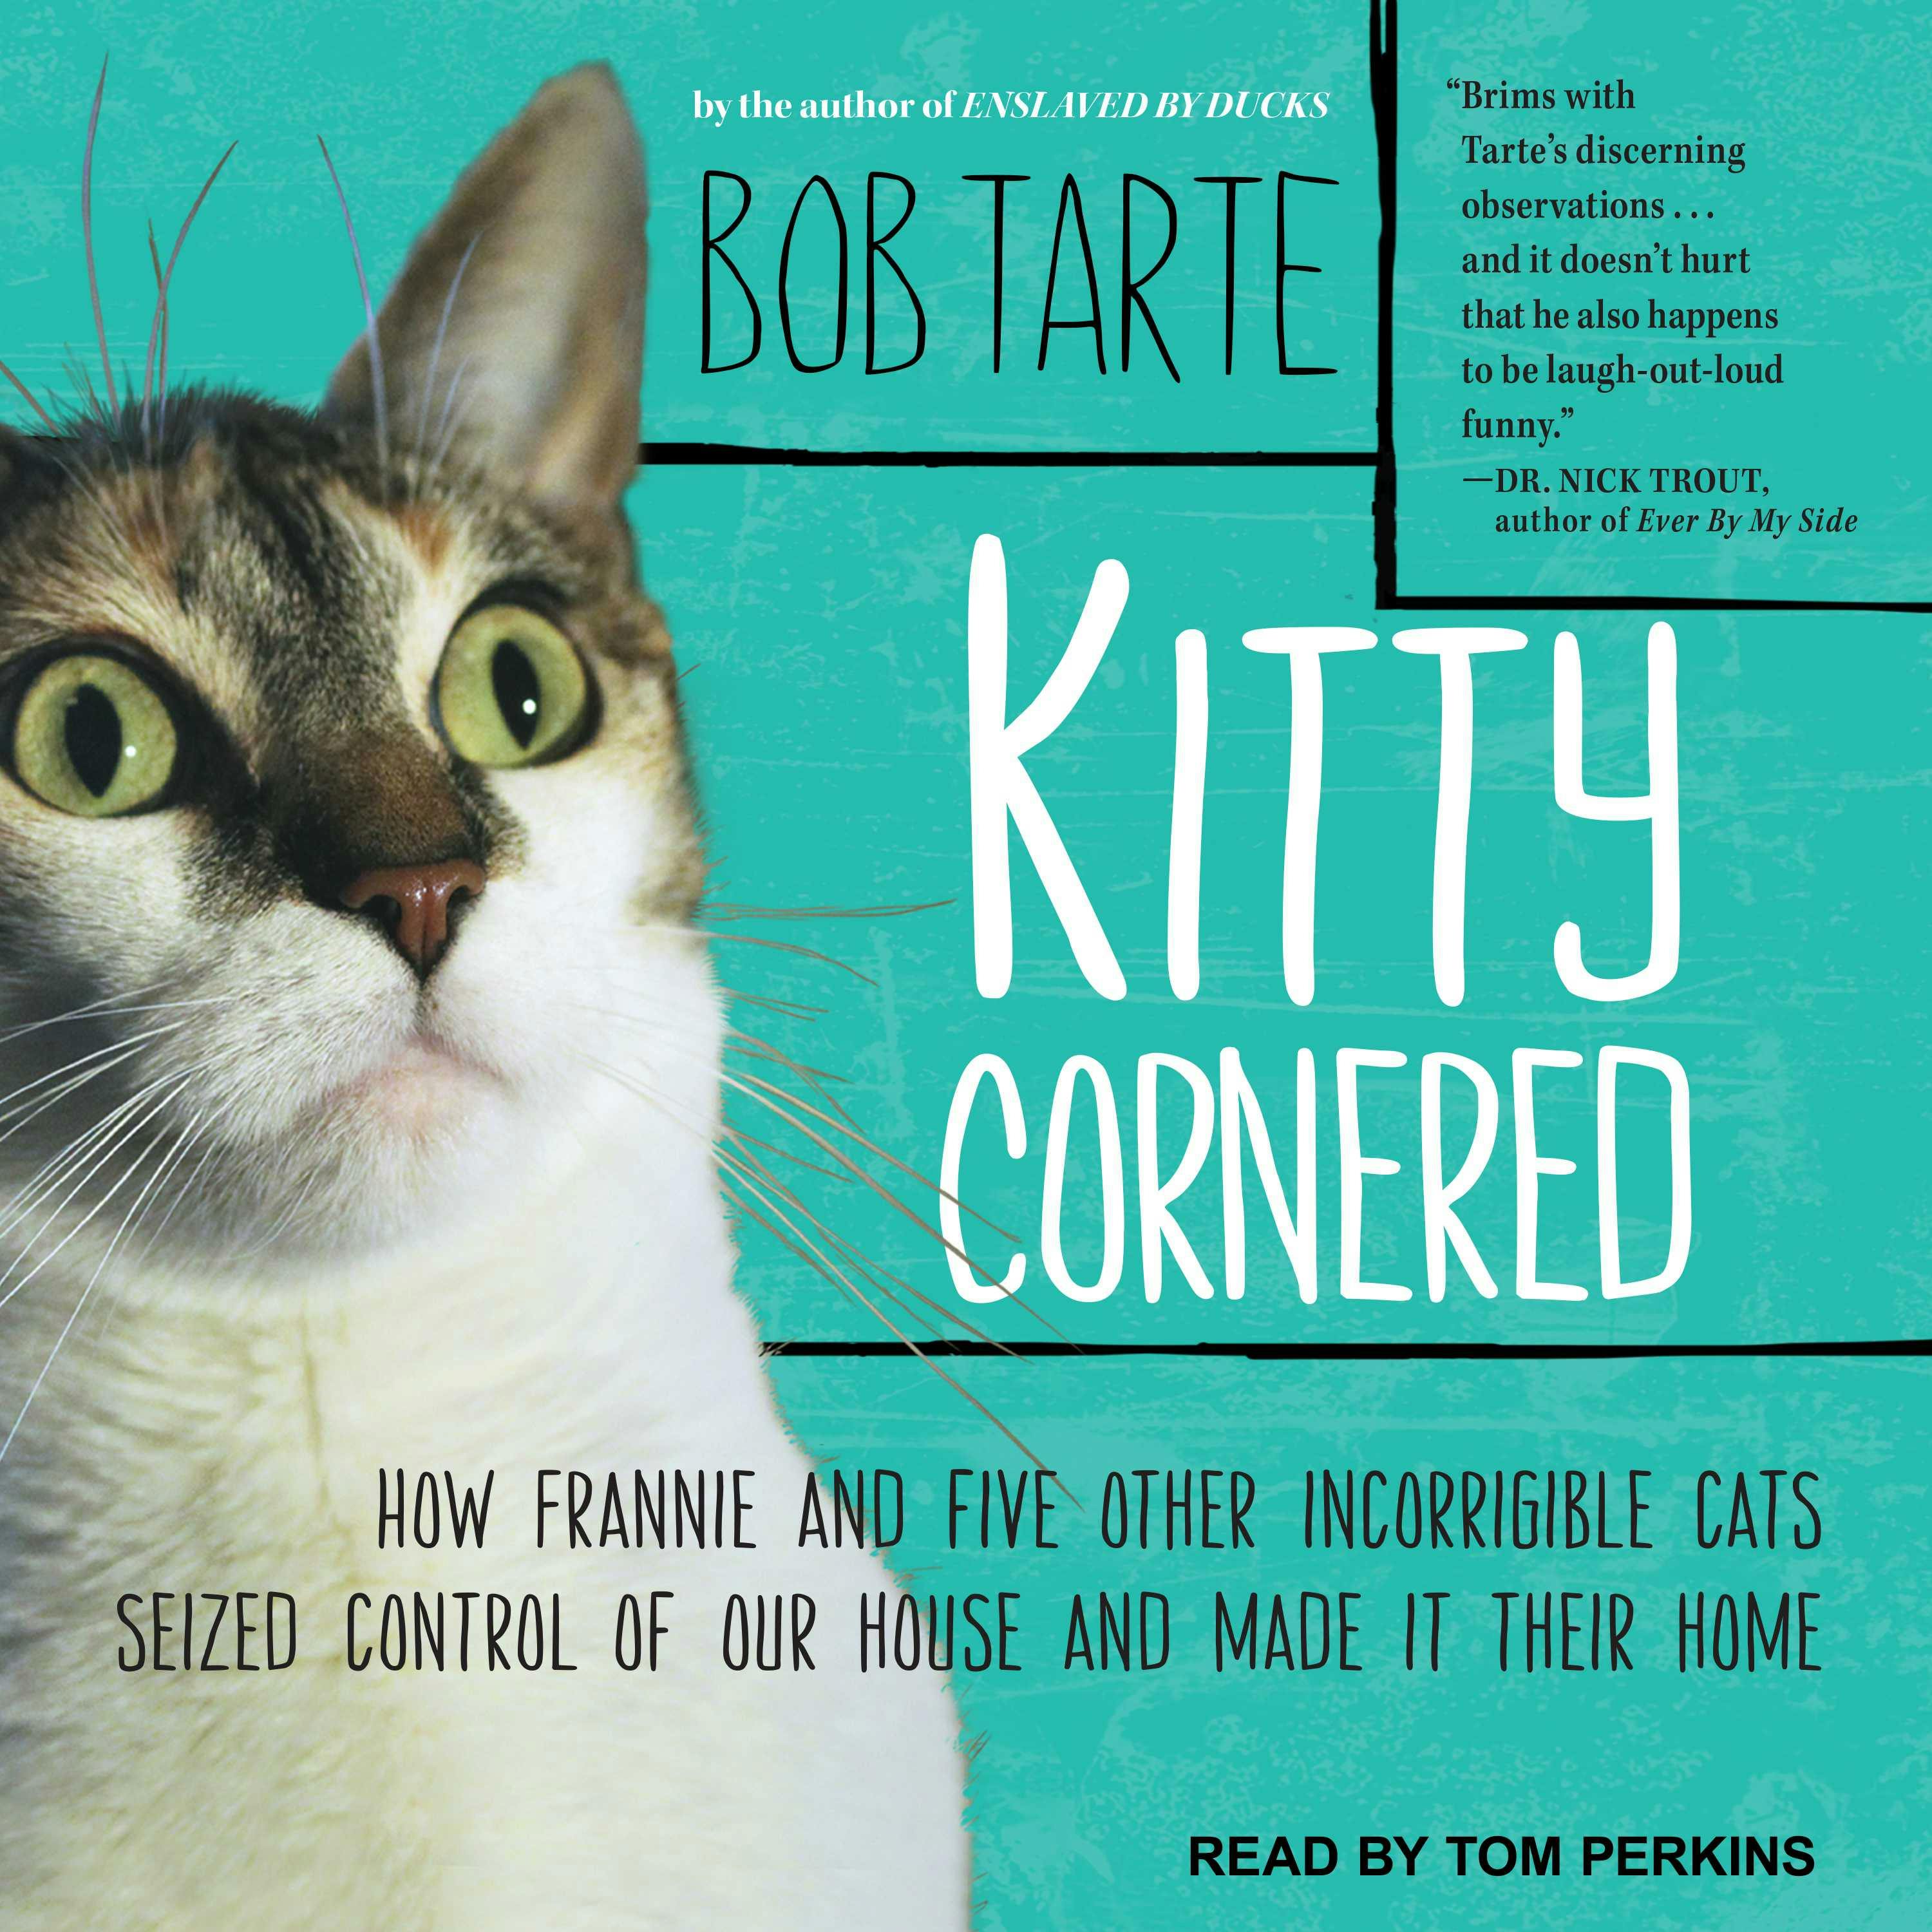 Kitty Cornered: How Frannie and Five Other Incorrigible Cats Seized Control of Our House and Made It Their Home - Bob Tarte